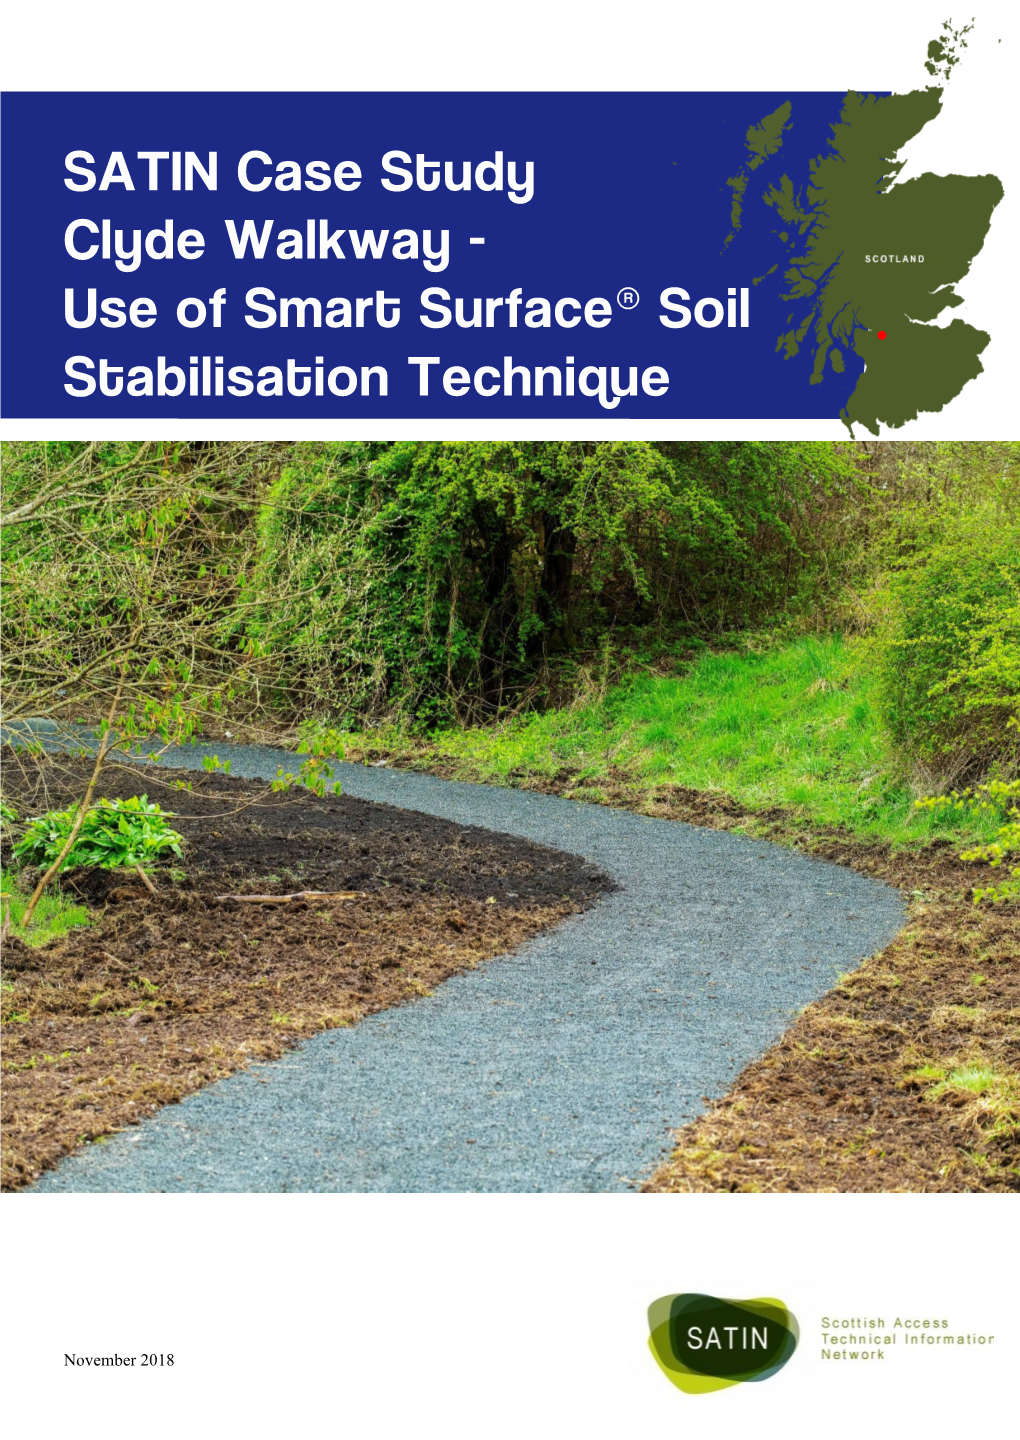 Clyde Walkway - Use of Smart Surface® Soil Stabilisation Technique